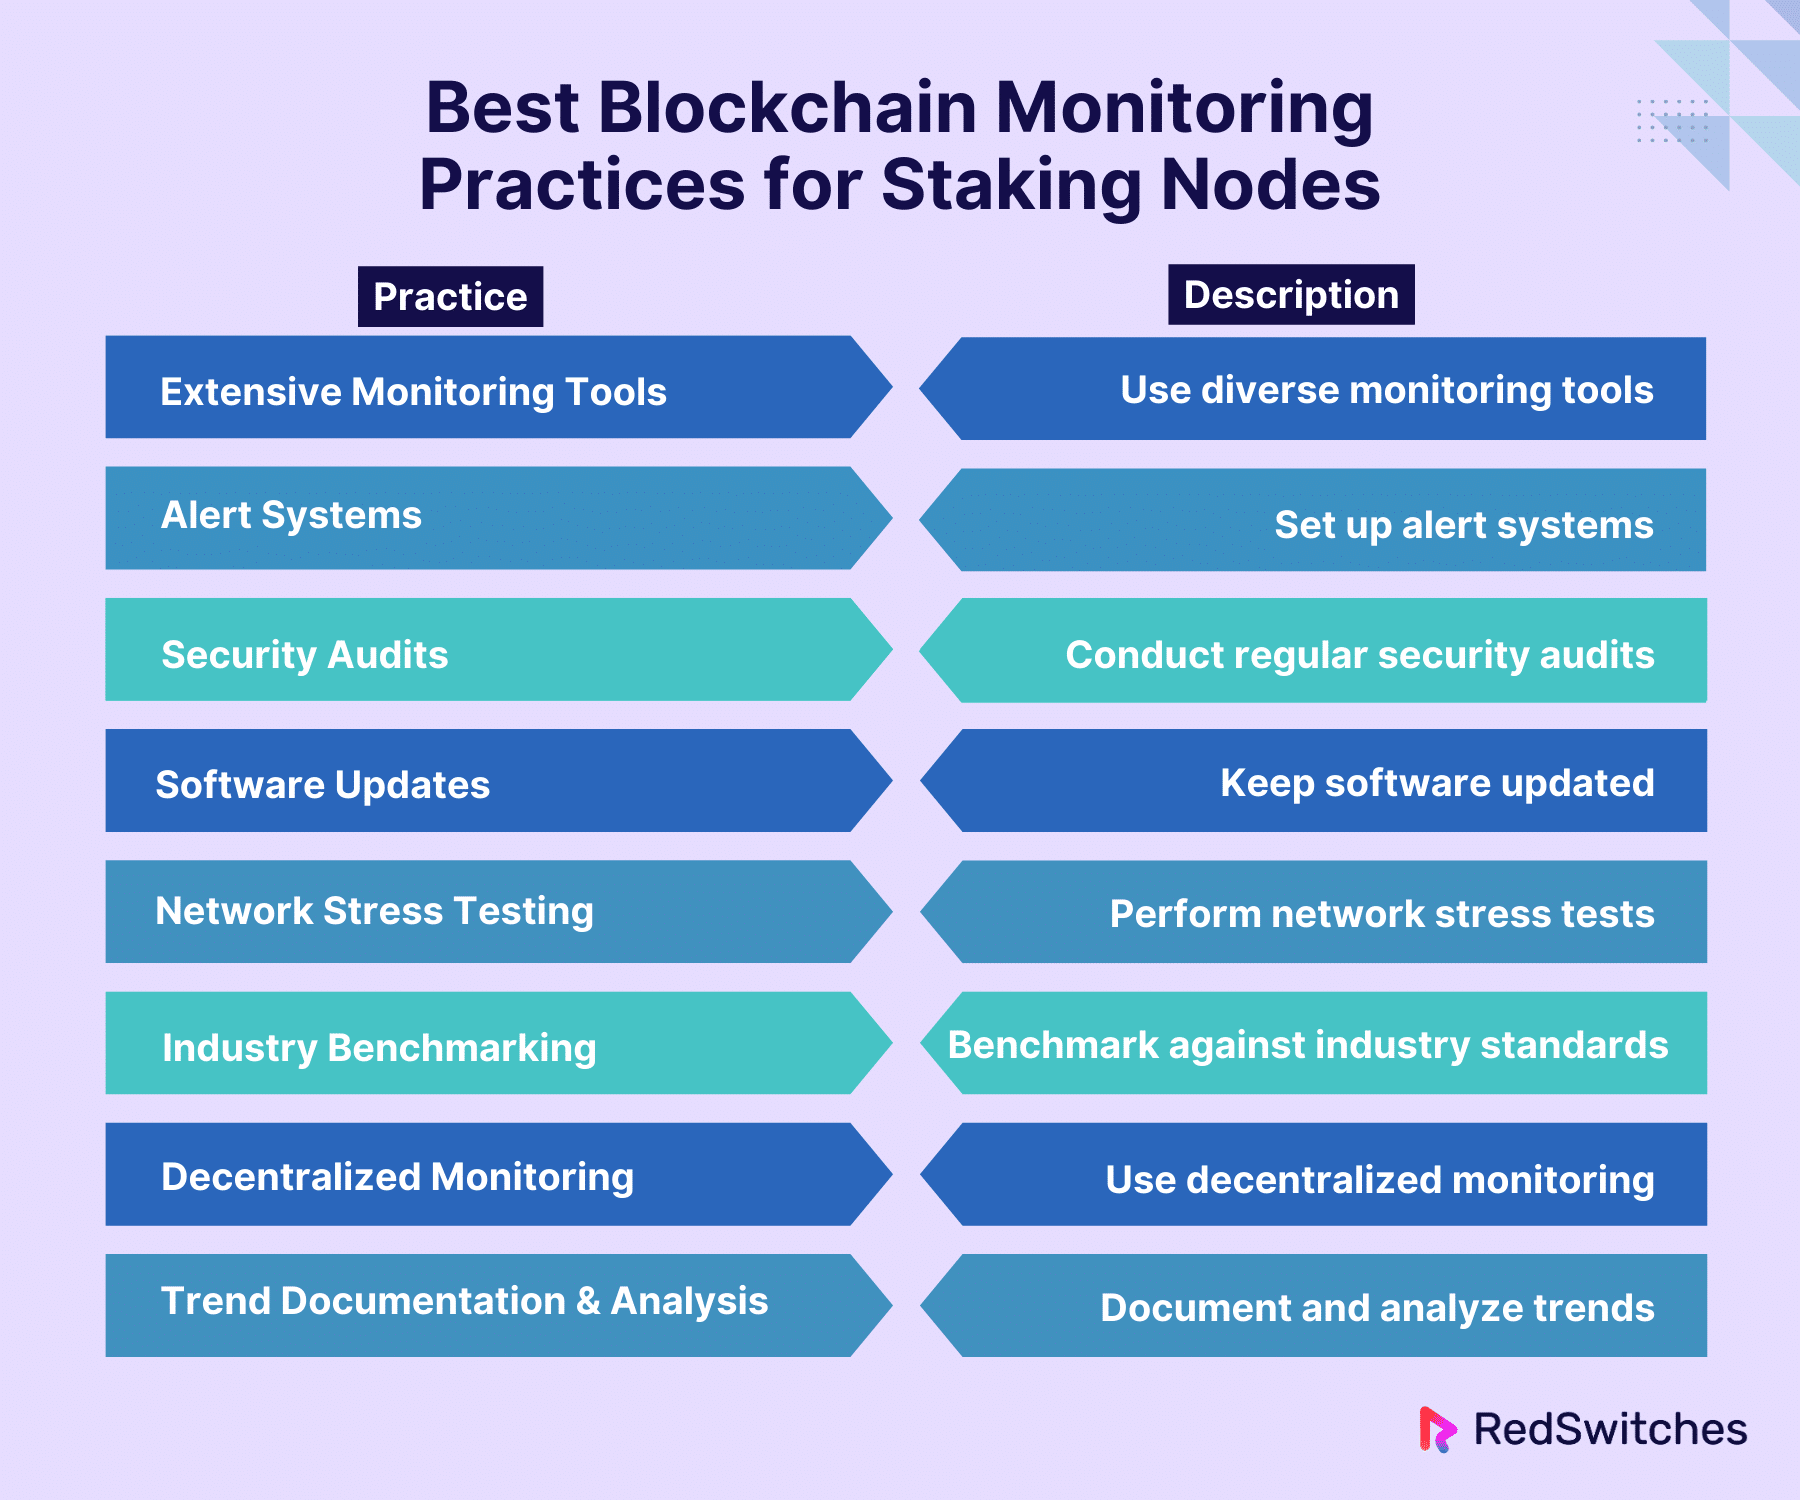 Best Blockchain Monitoring Practices for Staking Nodes